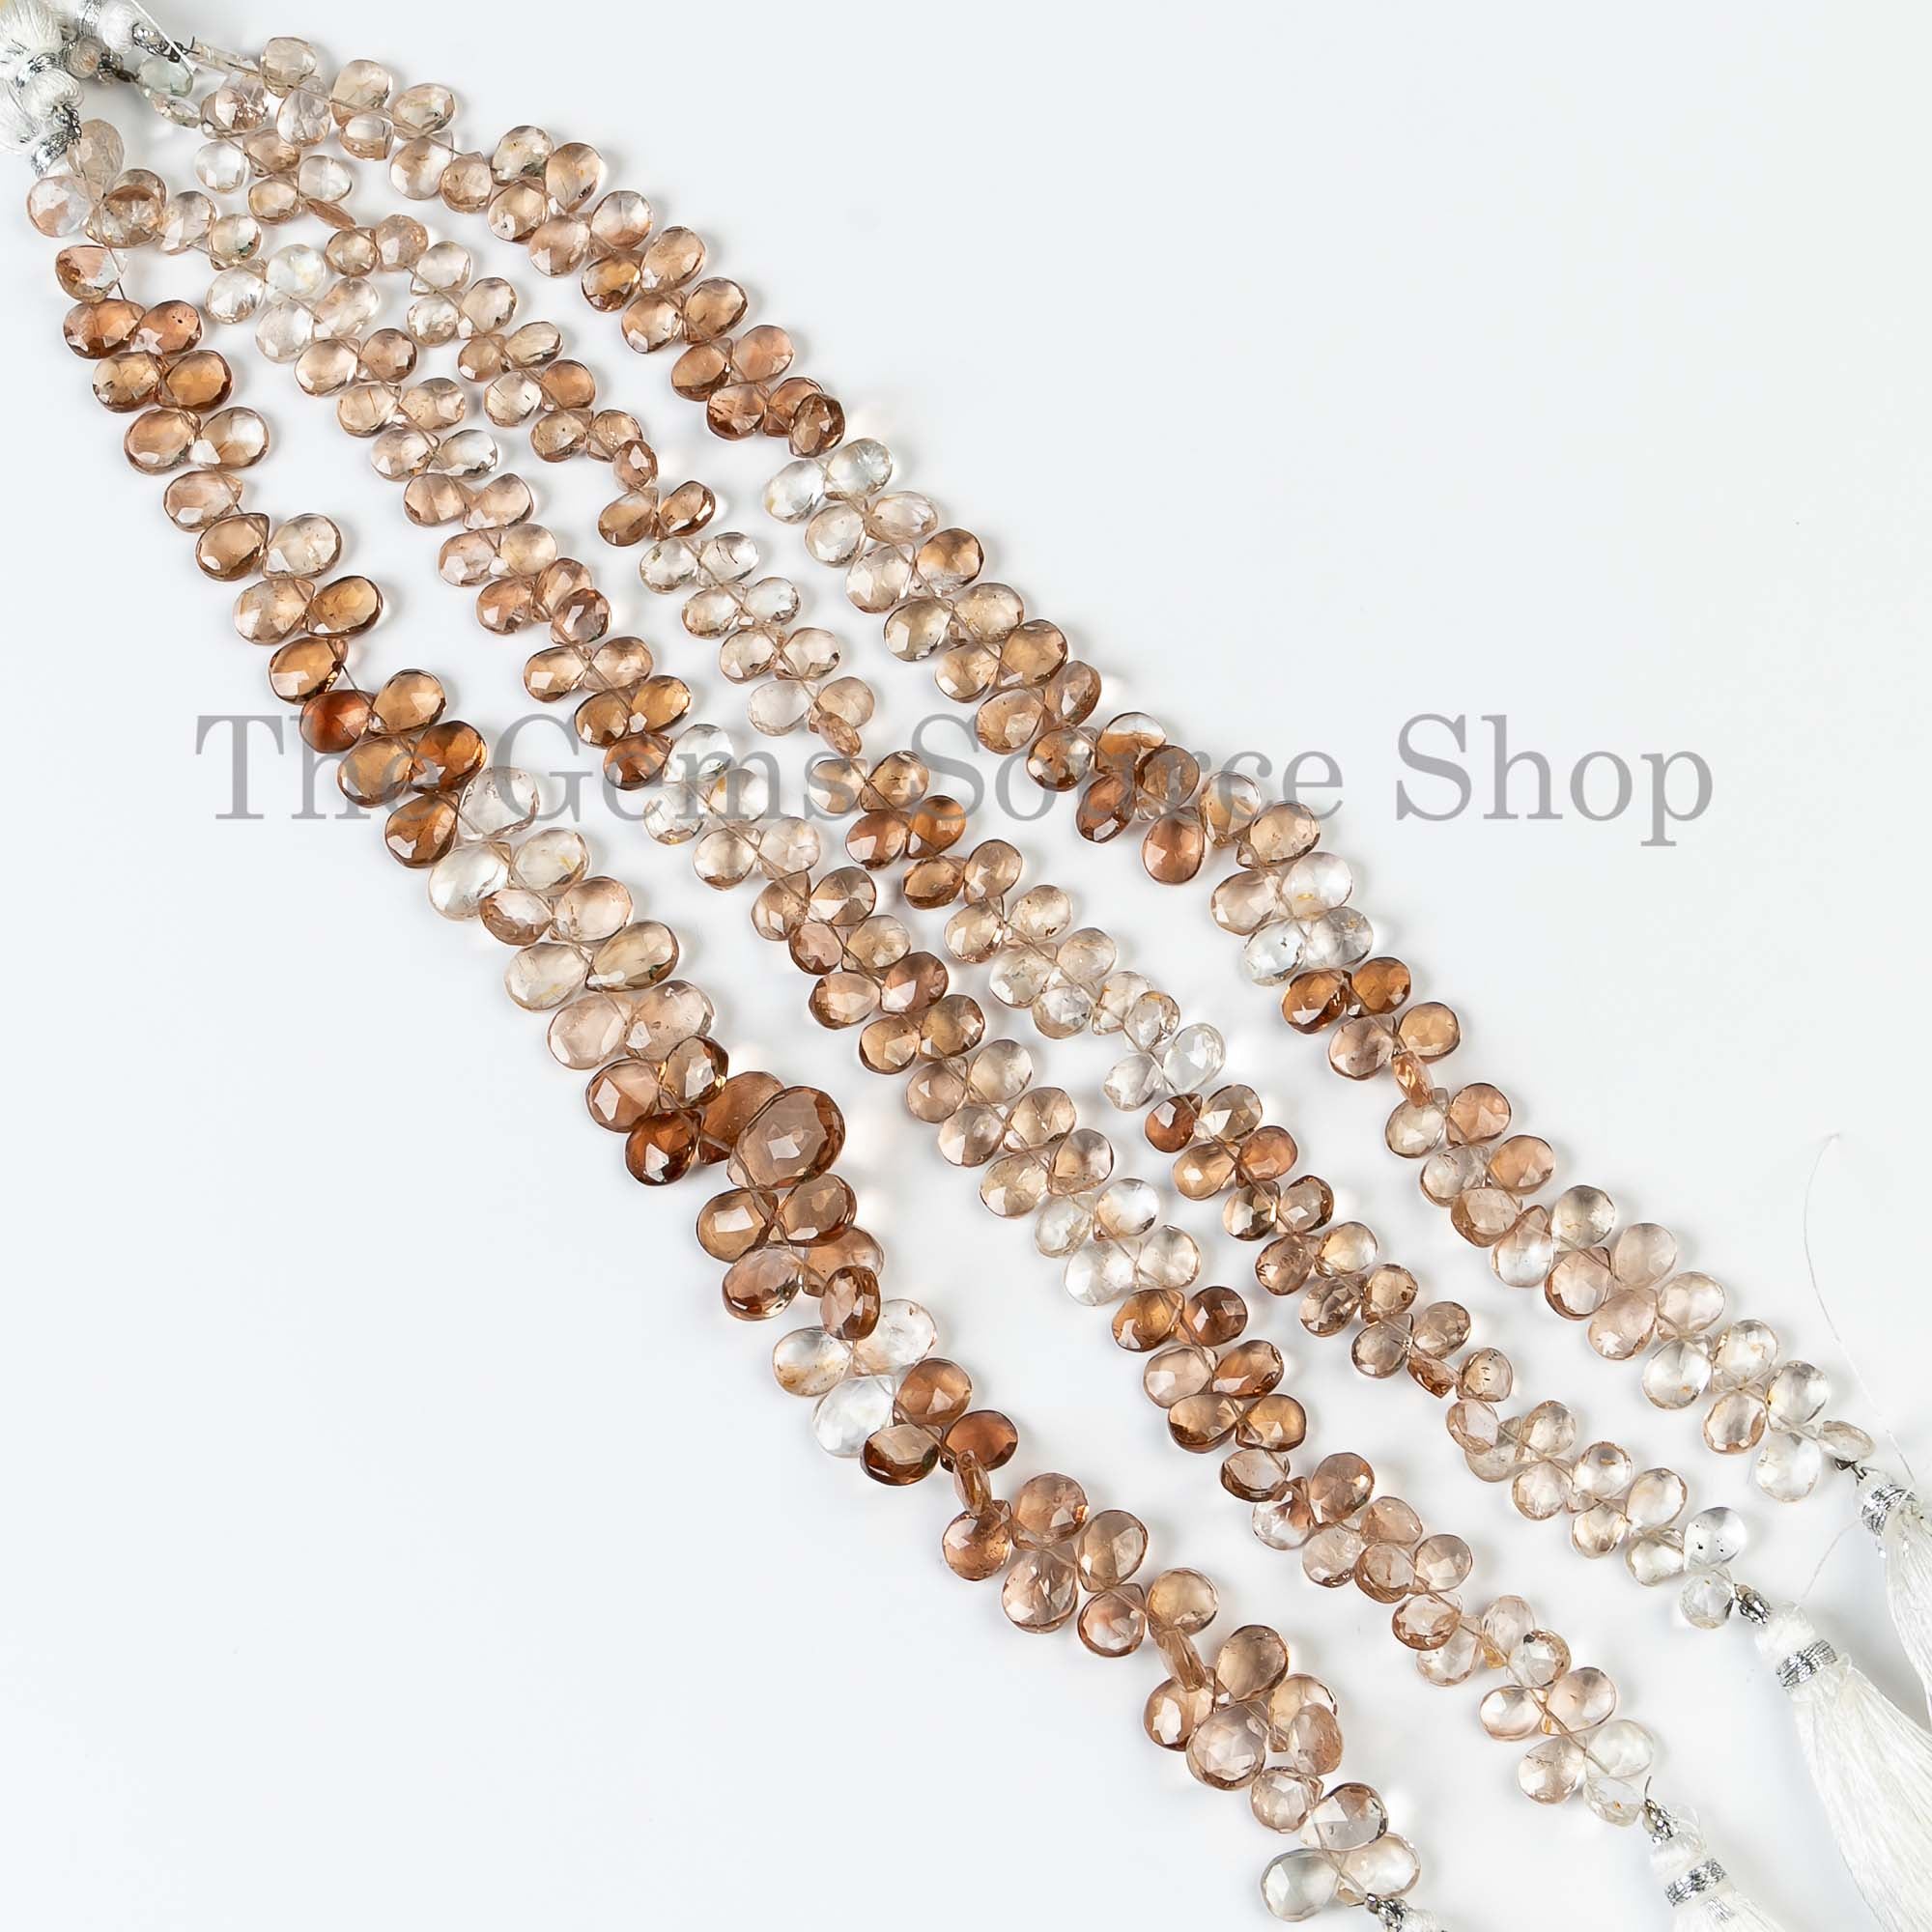 New Arrival Brown Topaz Faceted Pear Beads, Brown Topaz Beads, Wholesale Gemstone Beads